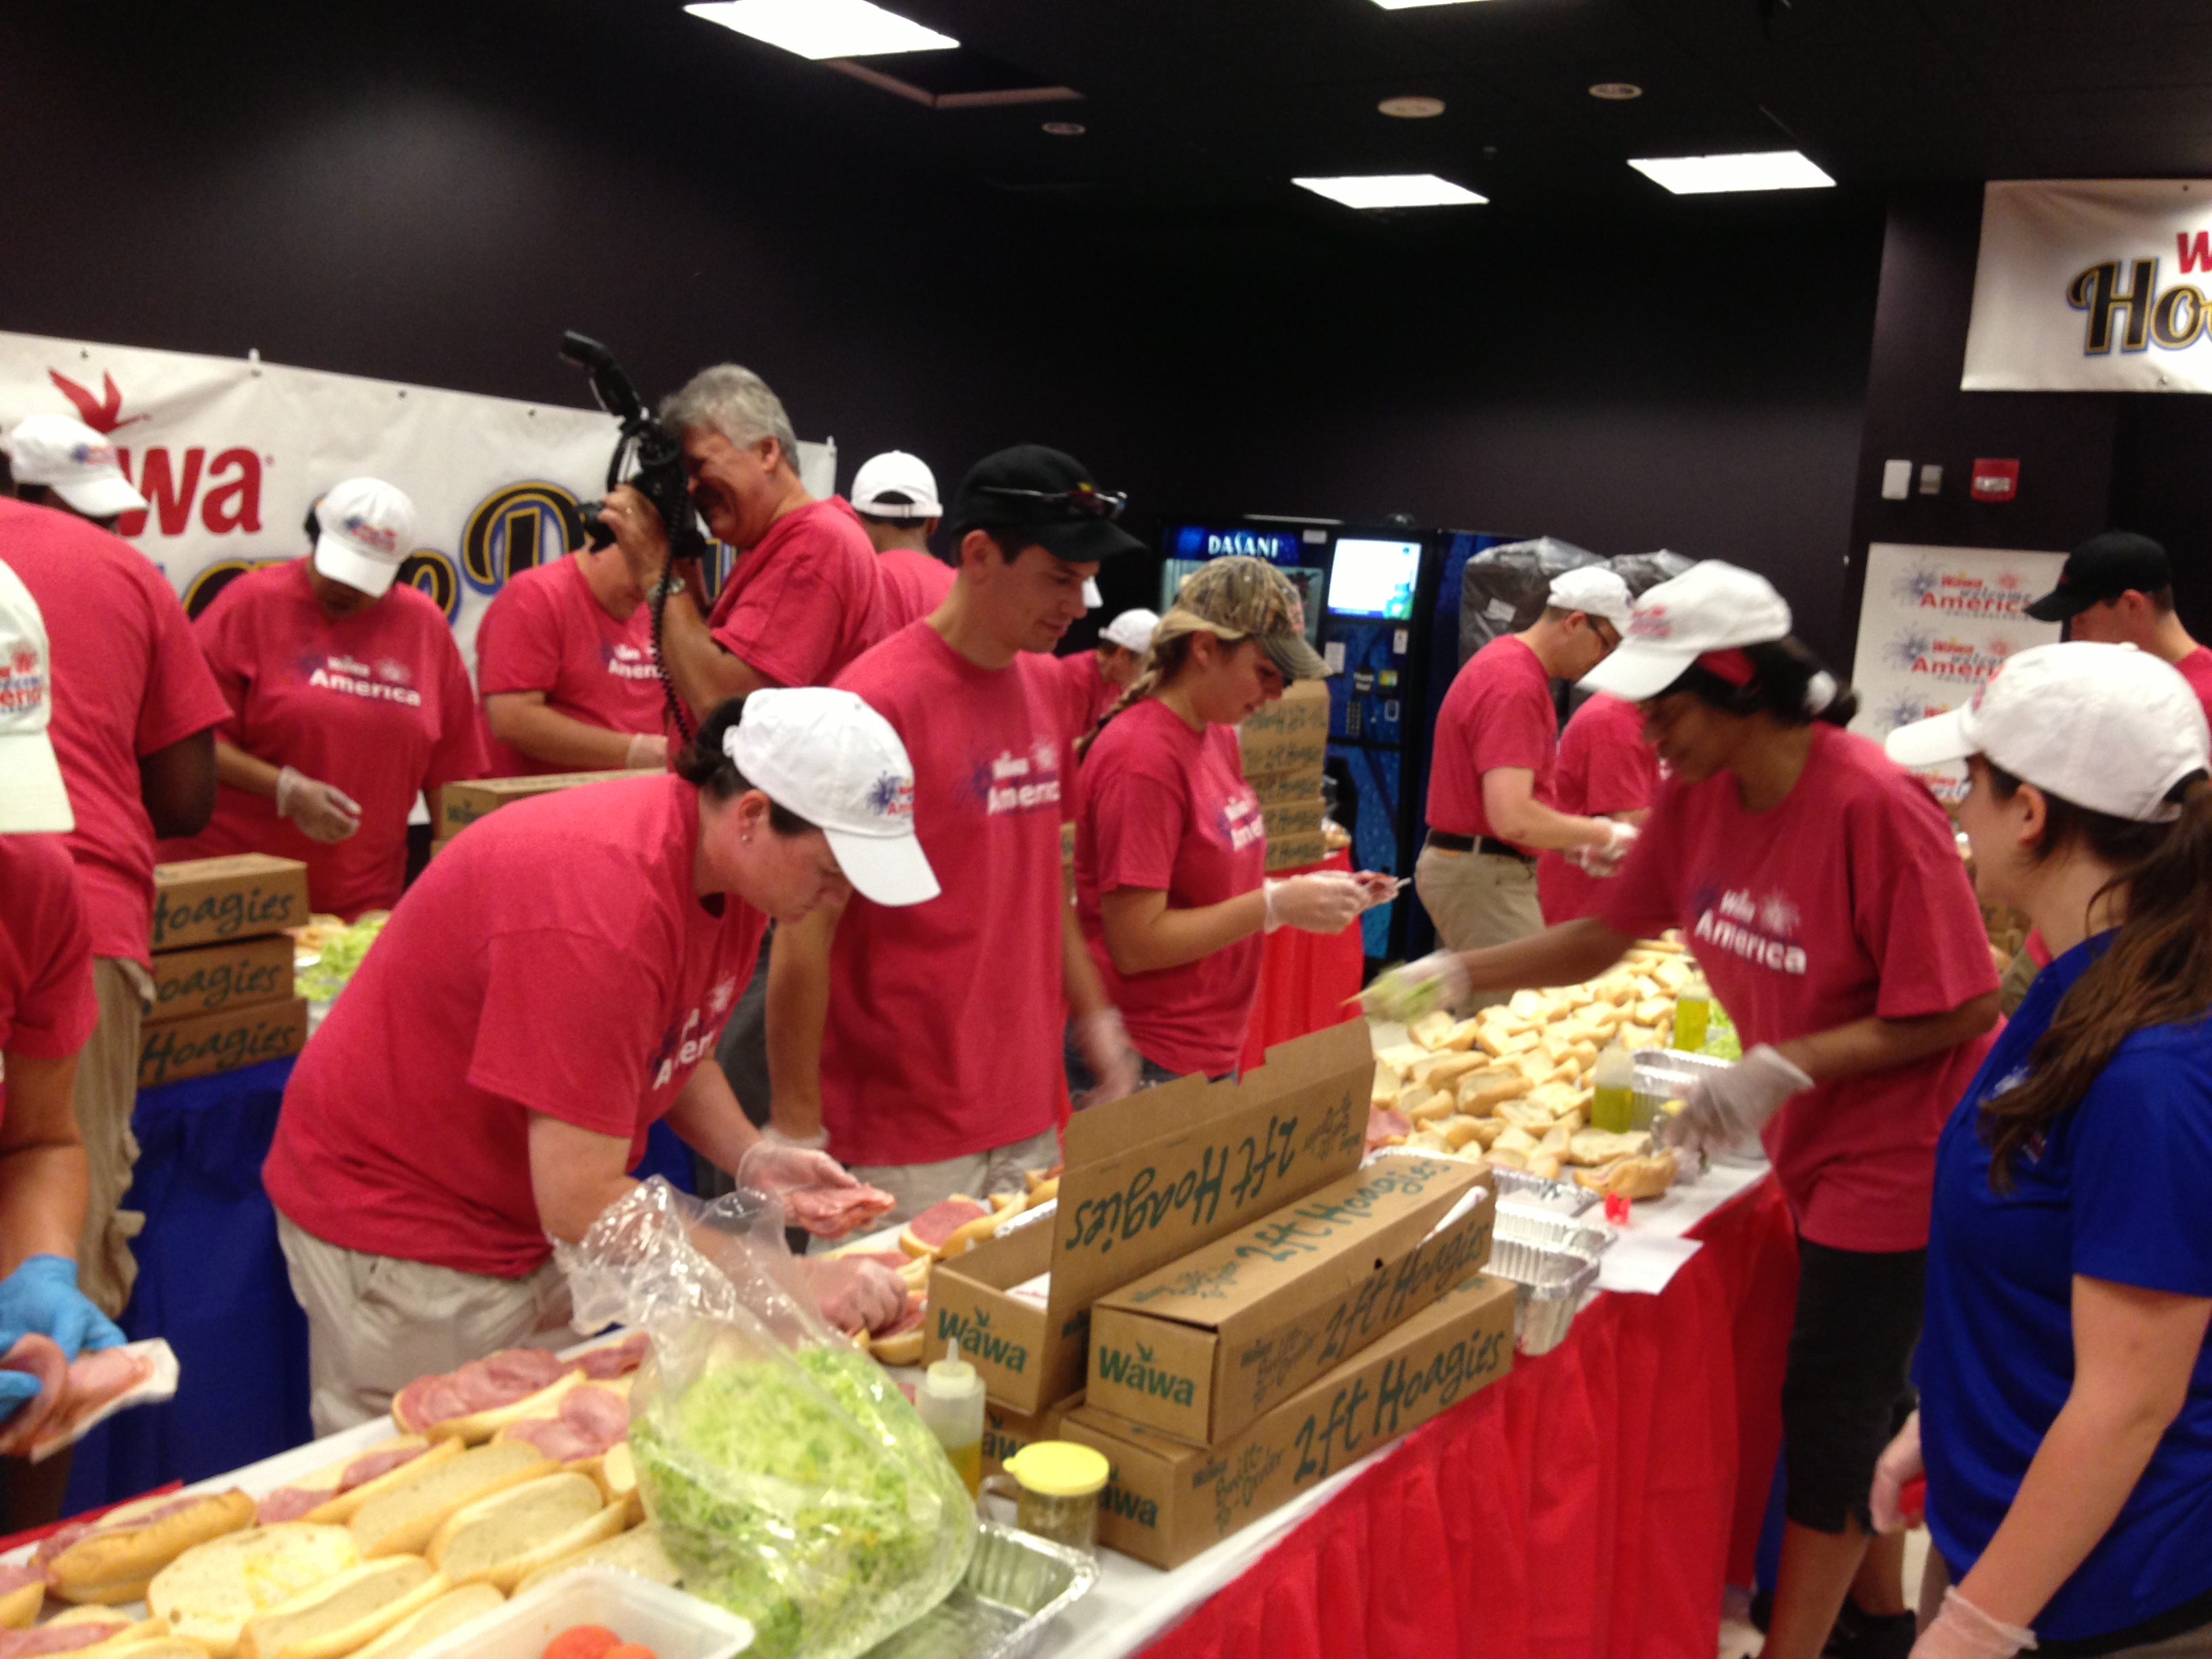 Wawa employees build a giant hoagie at the Independence Visitor Center. (Credit: Justin Udo)